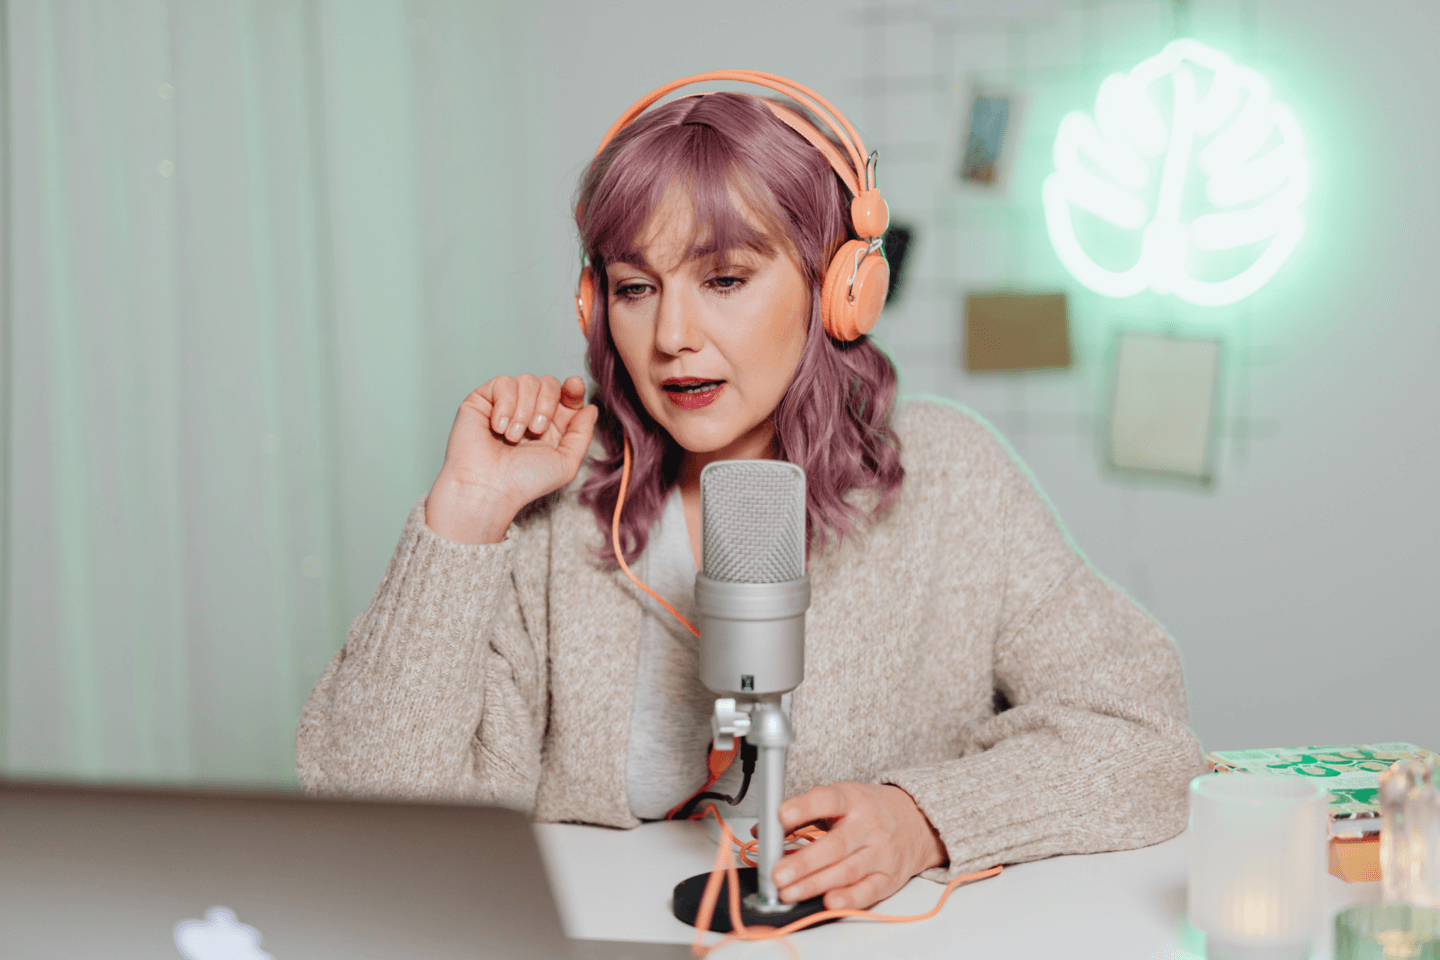 an influencer wearing headphones speaking into a microphone